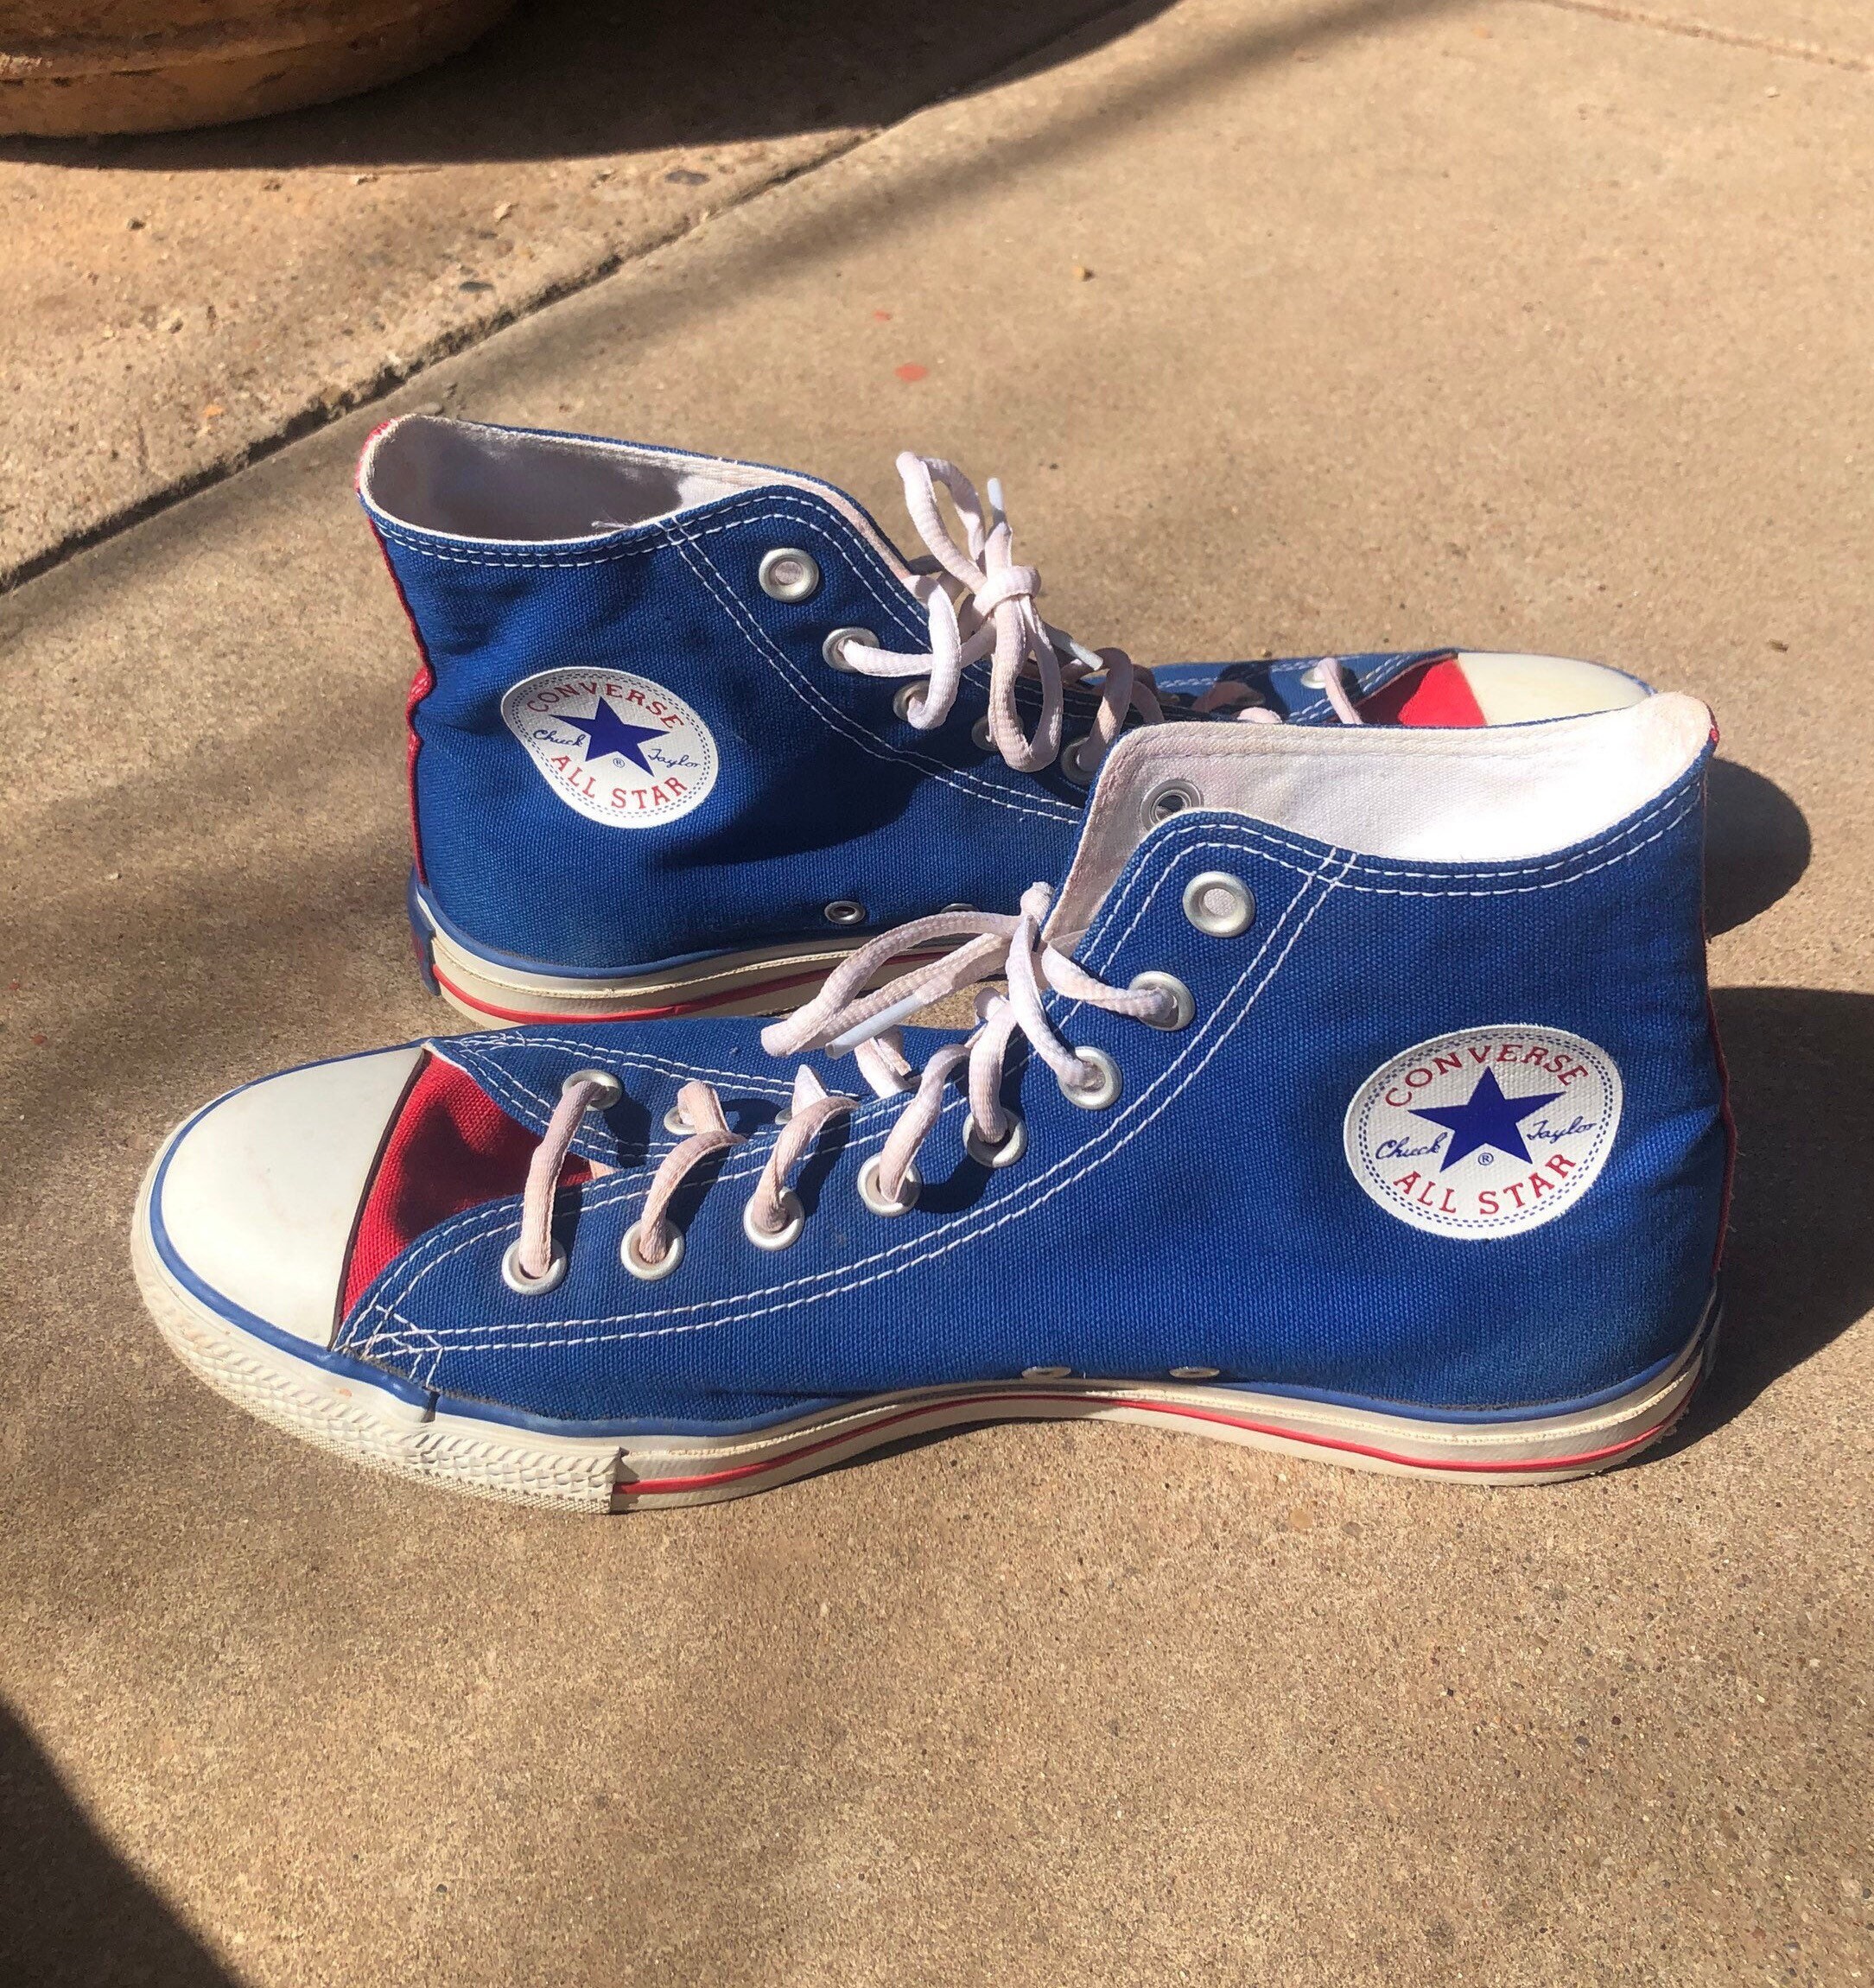 Converse All Star Chuck Taylor High Tops Blue/white/red - Etsy